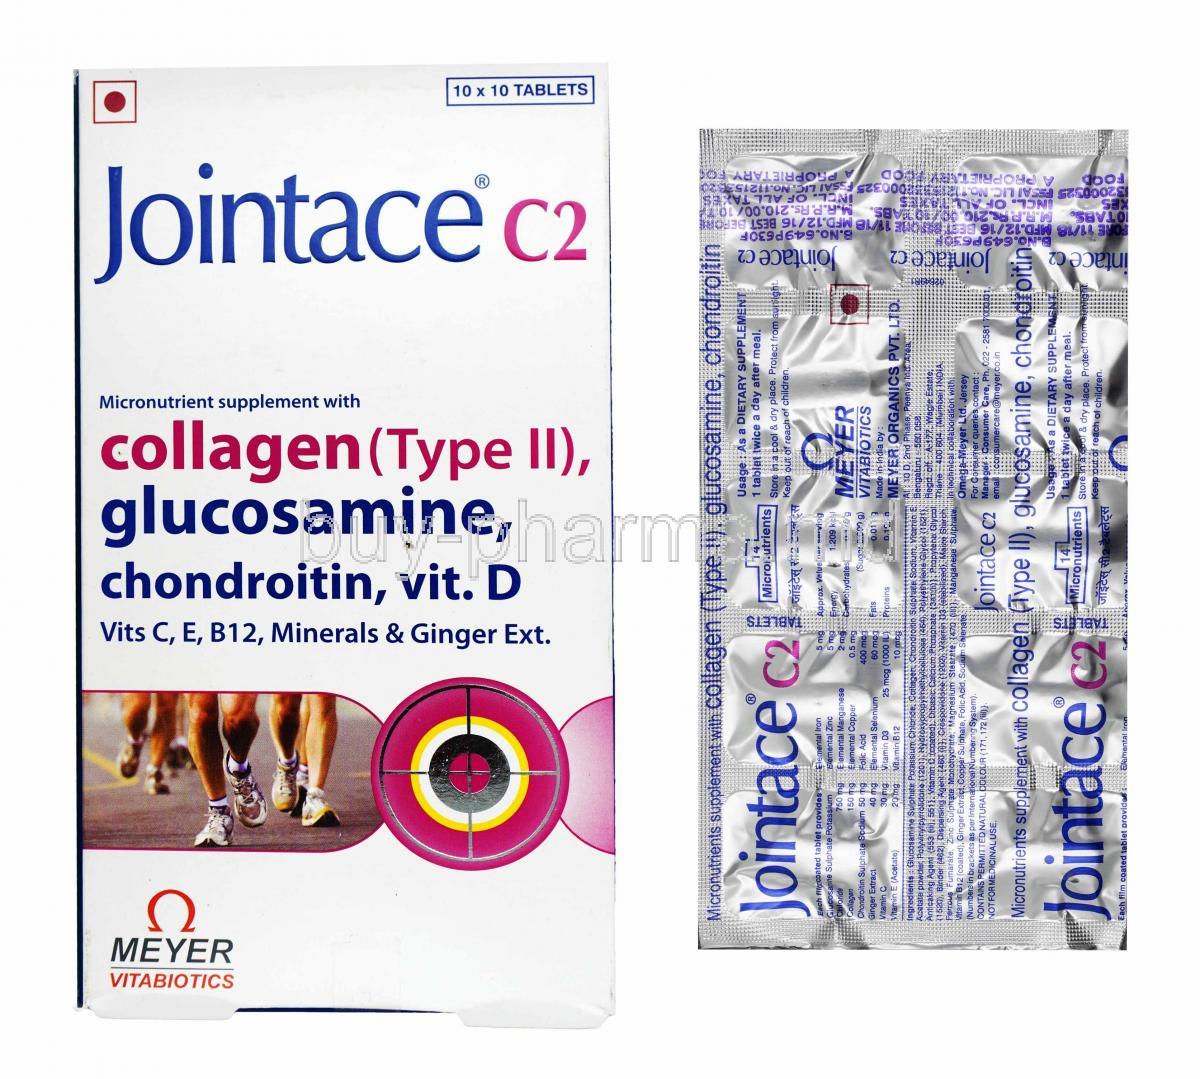 Jointace C2 box and tablets